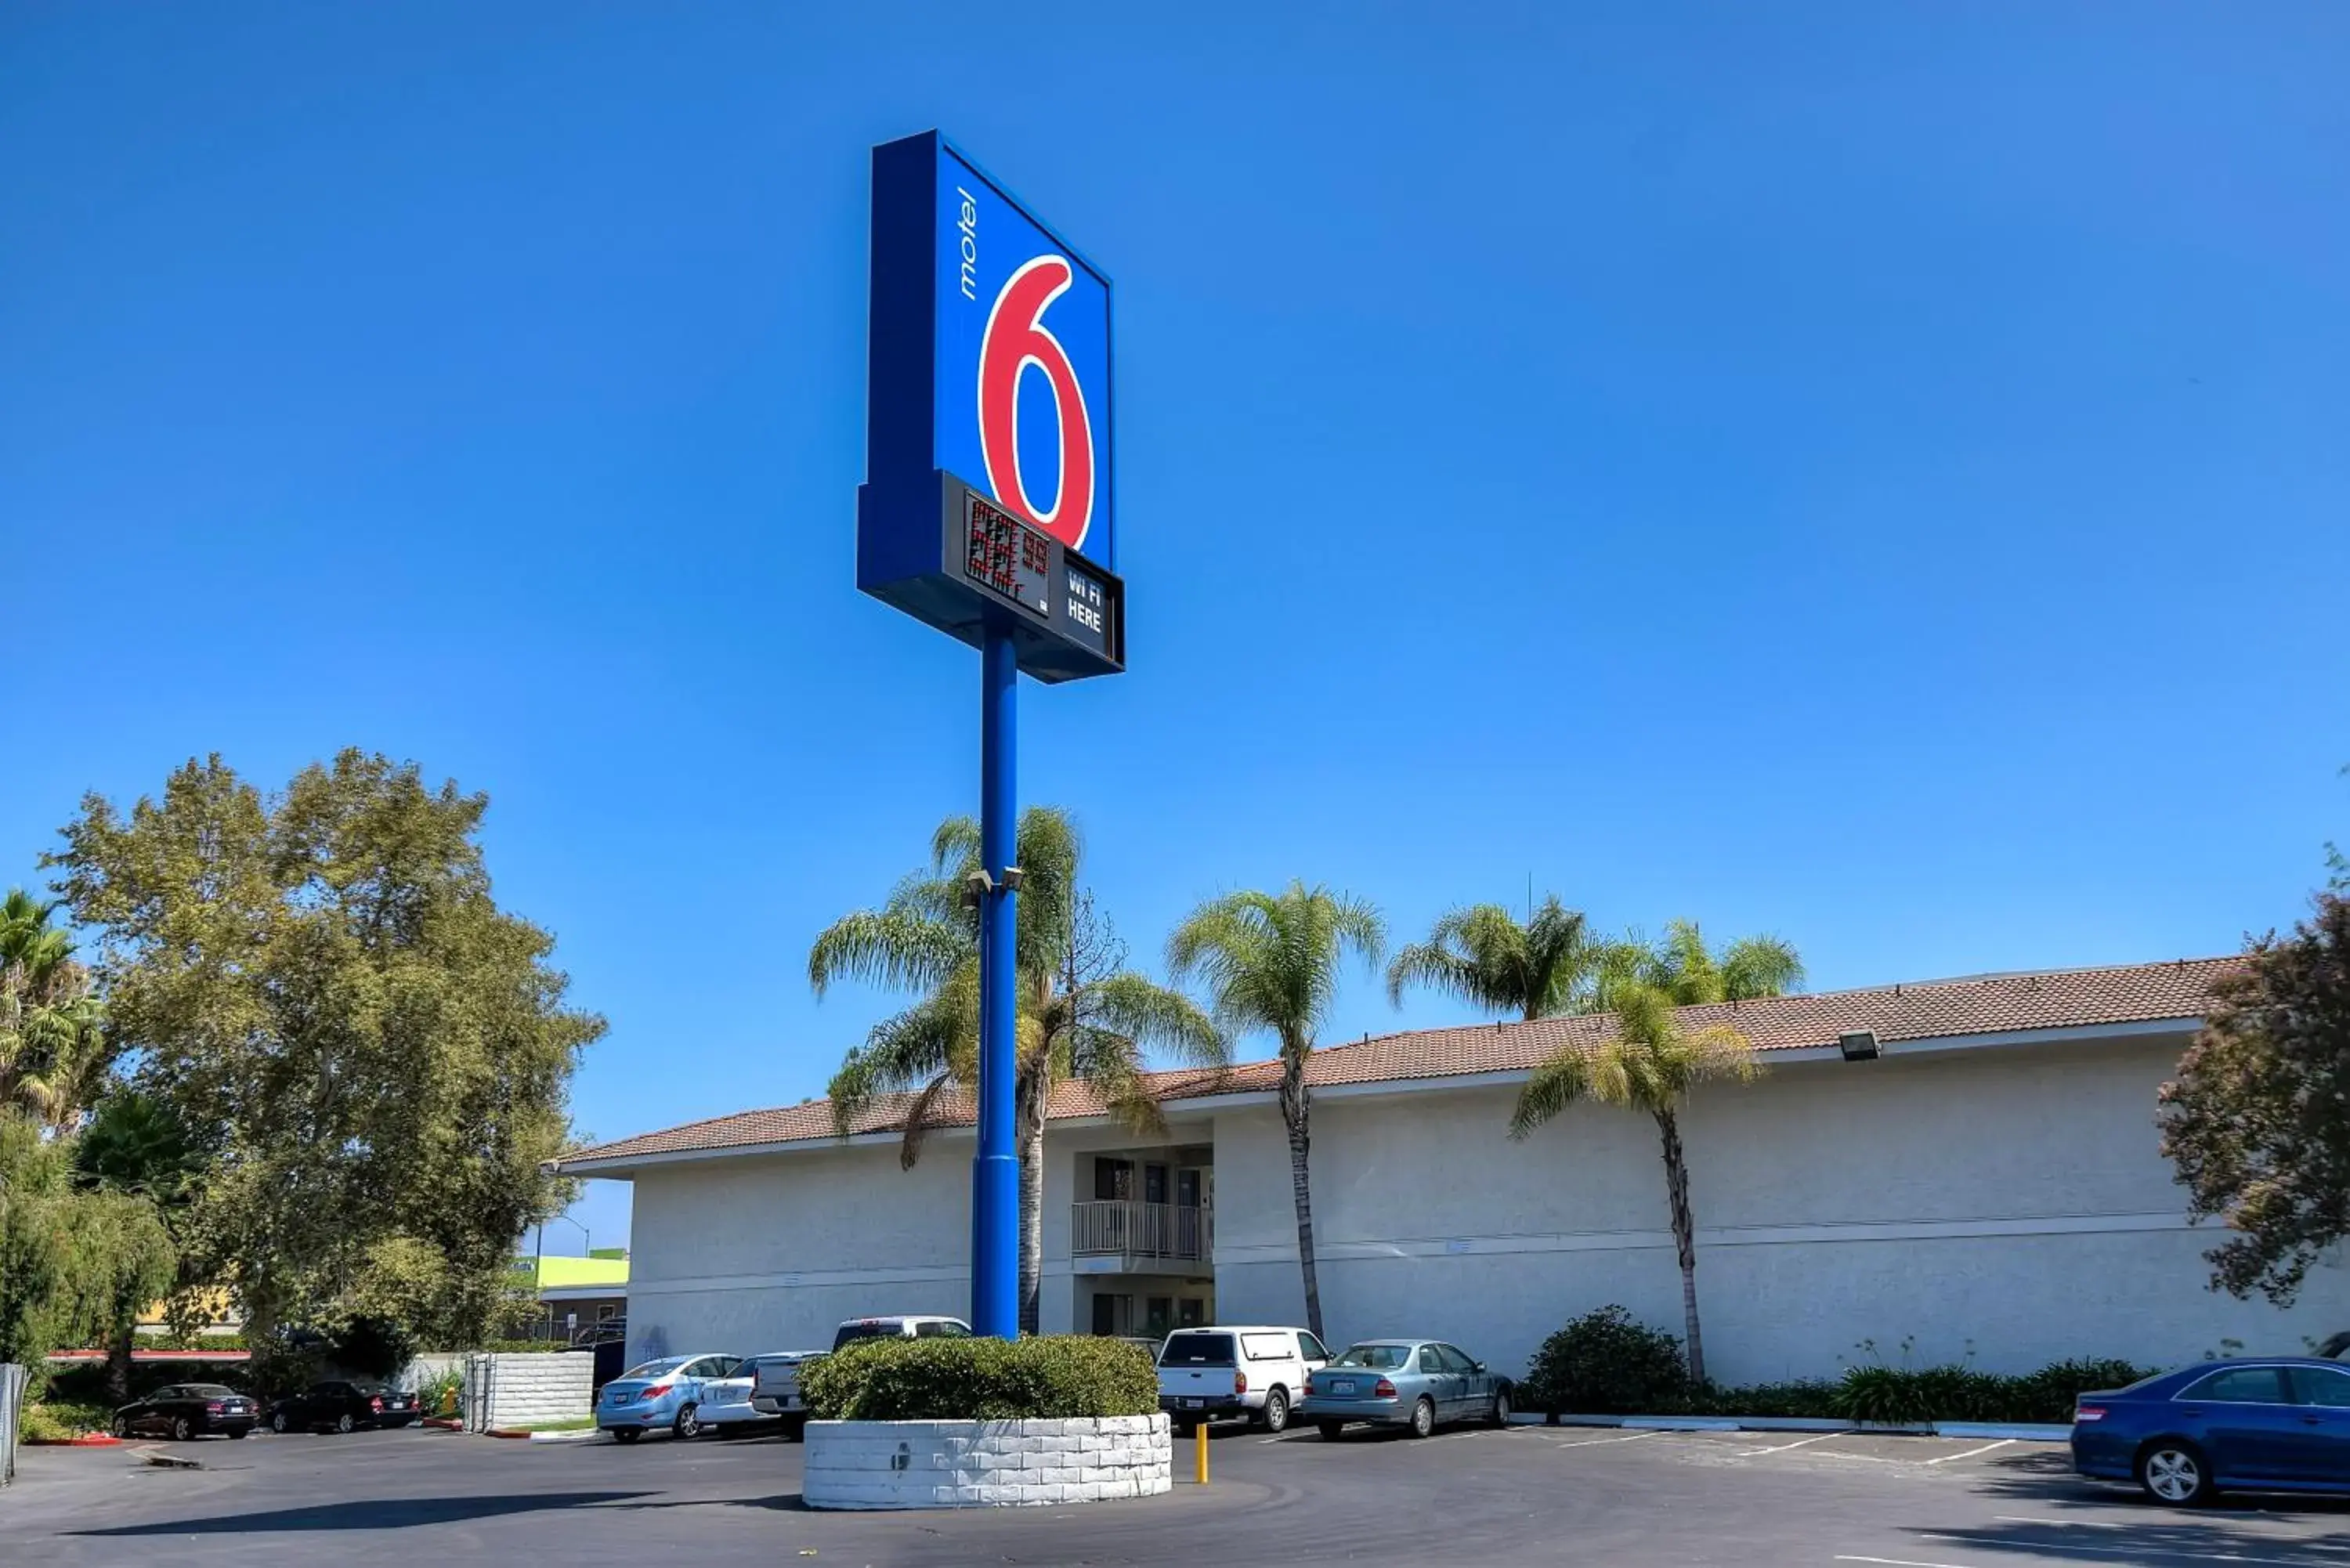 Property building in Motel 6-Rowland Heights, CA - Los Angeles - Pomona